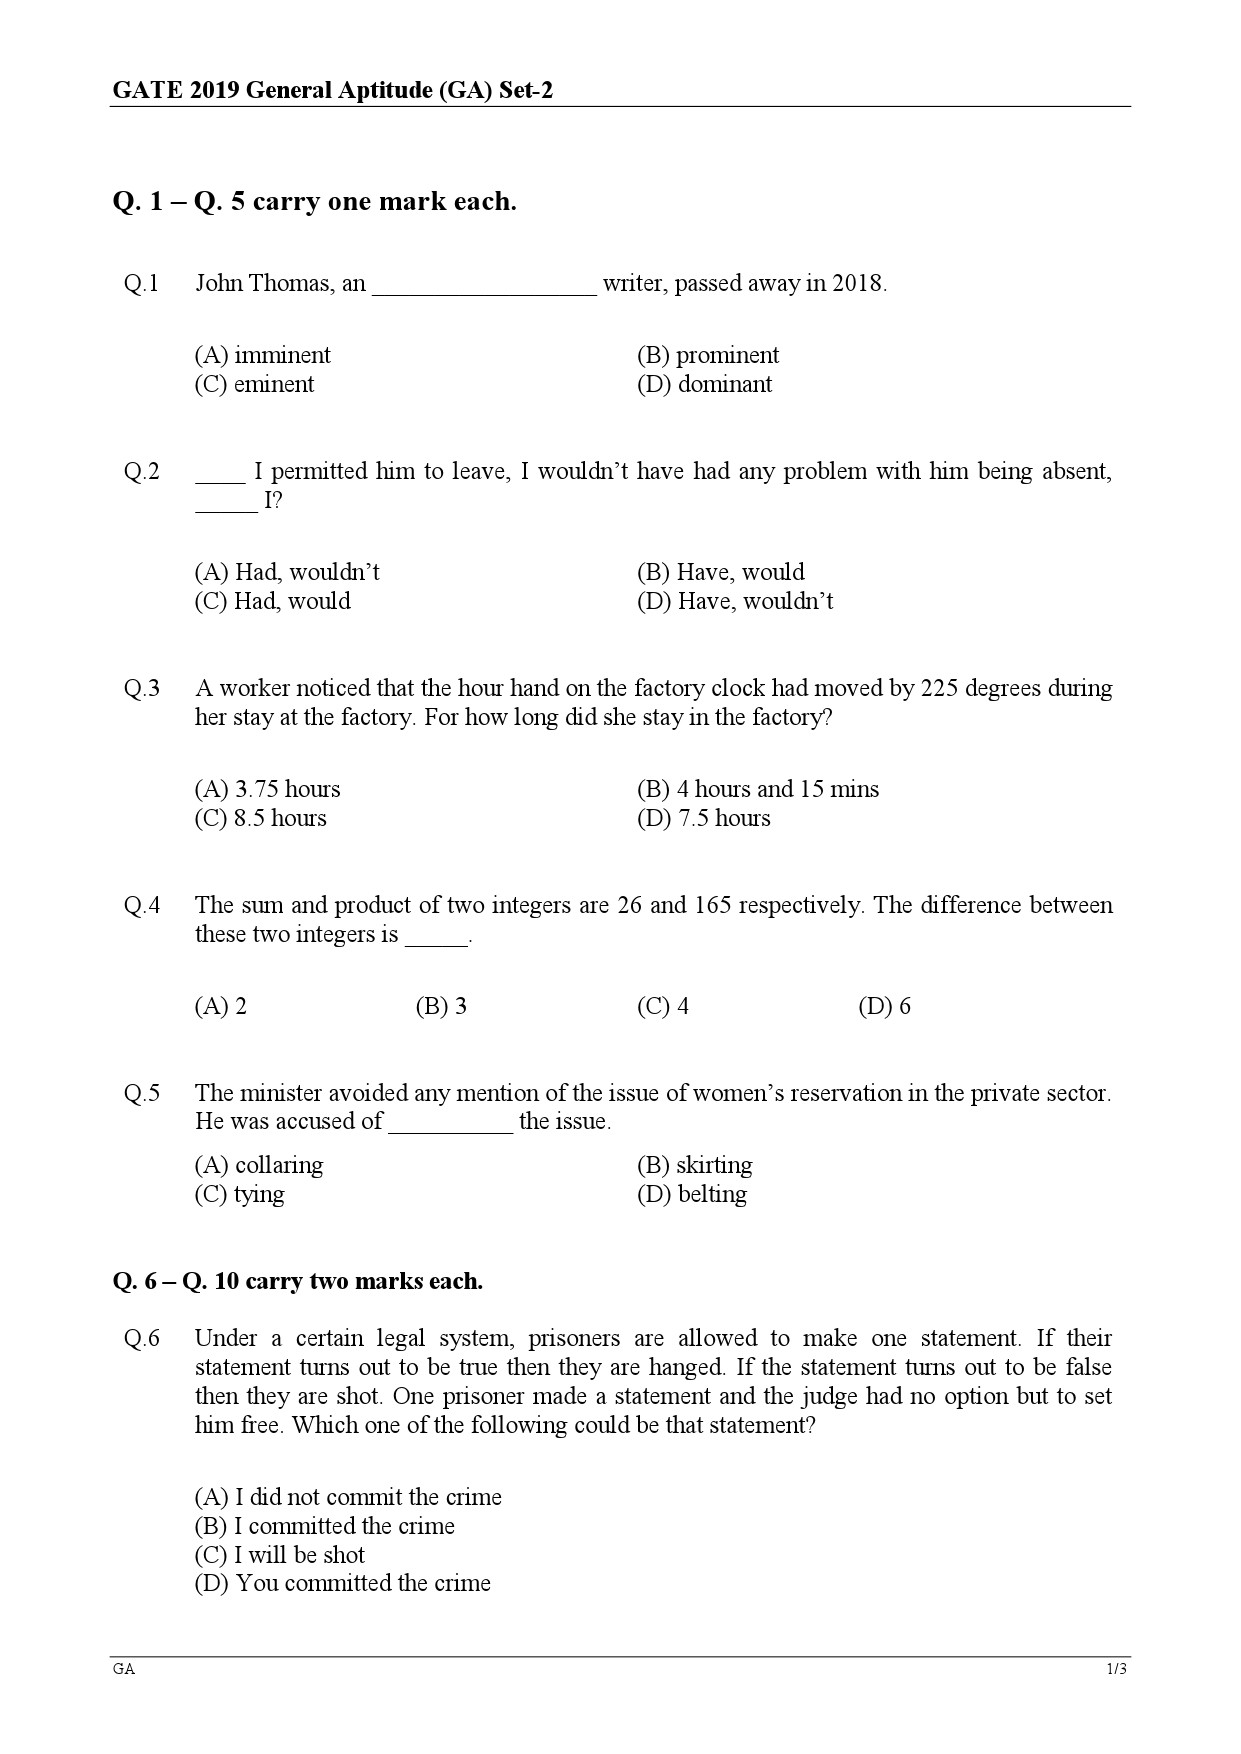 GATE Exam Question Paper 2019 Mining Engineering 1